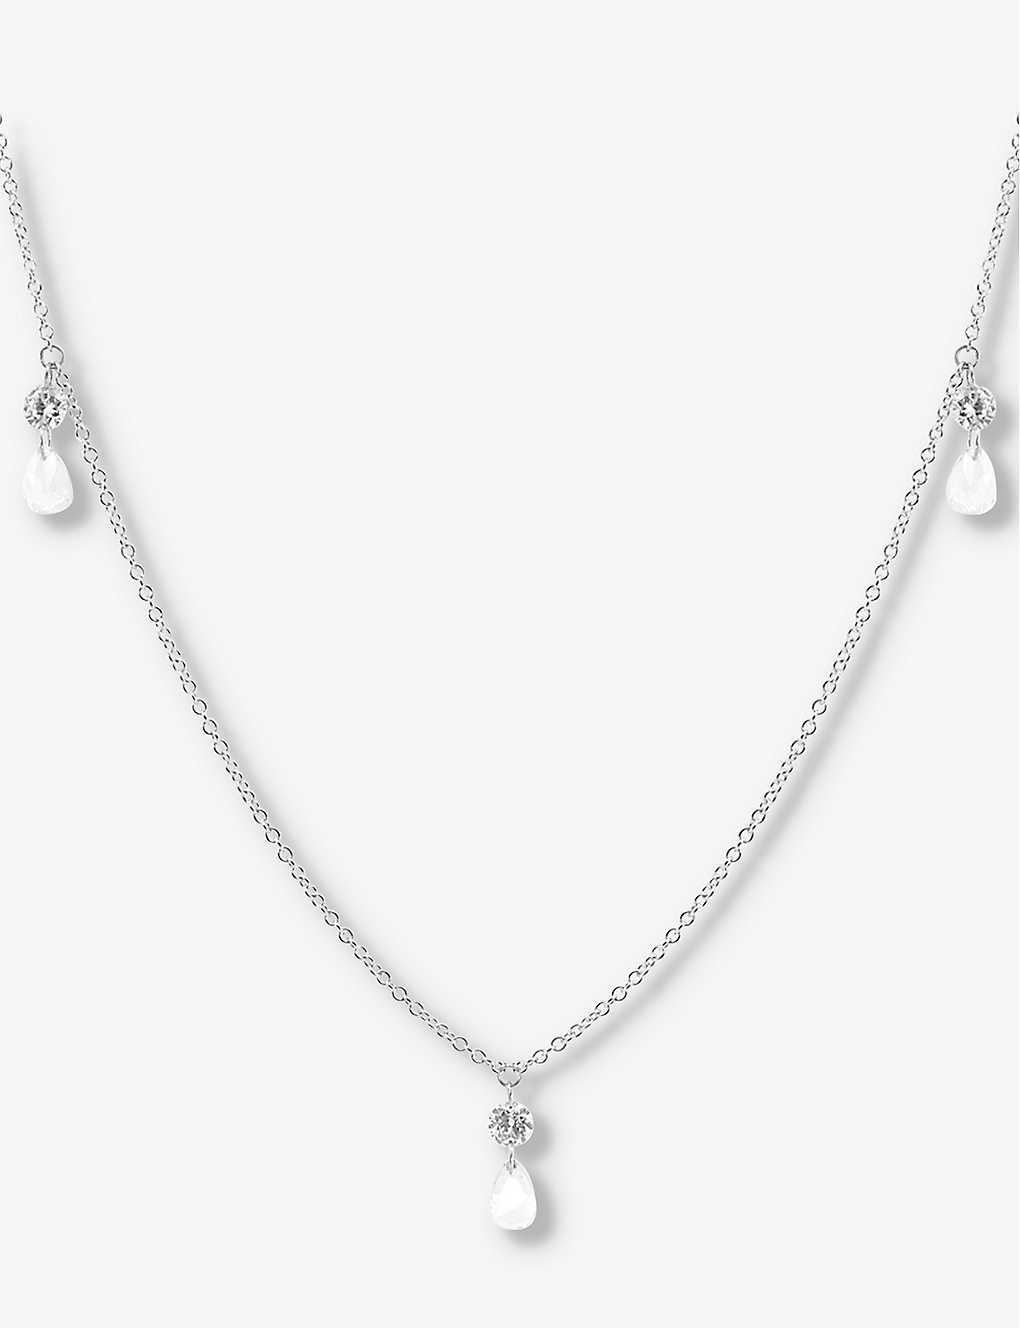 The Alkemistry Womens White Gold 18ct White-gold And 0.54ct Diamond Chain Necklace